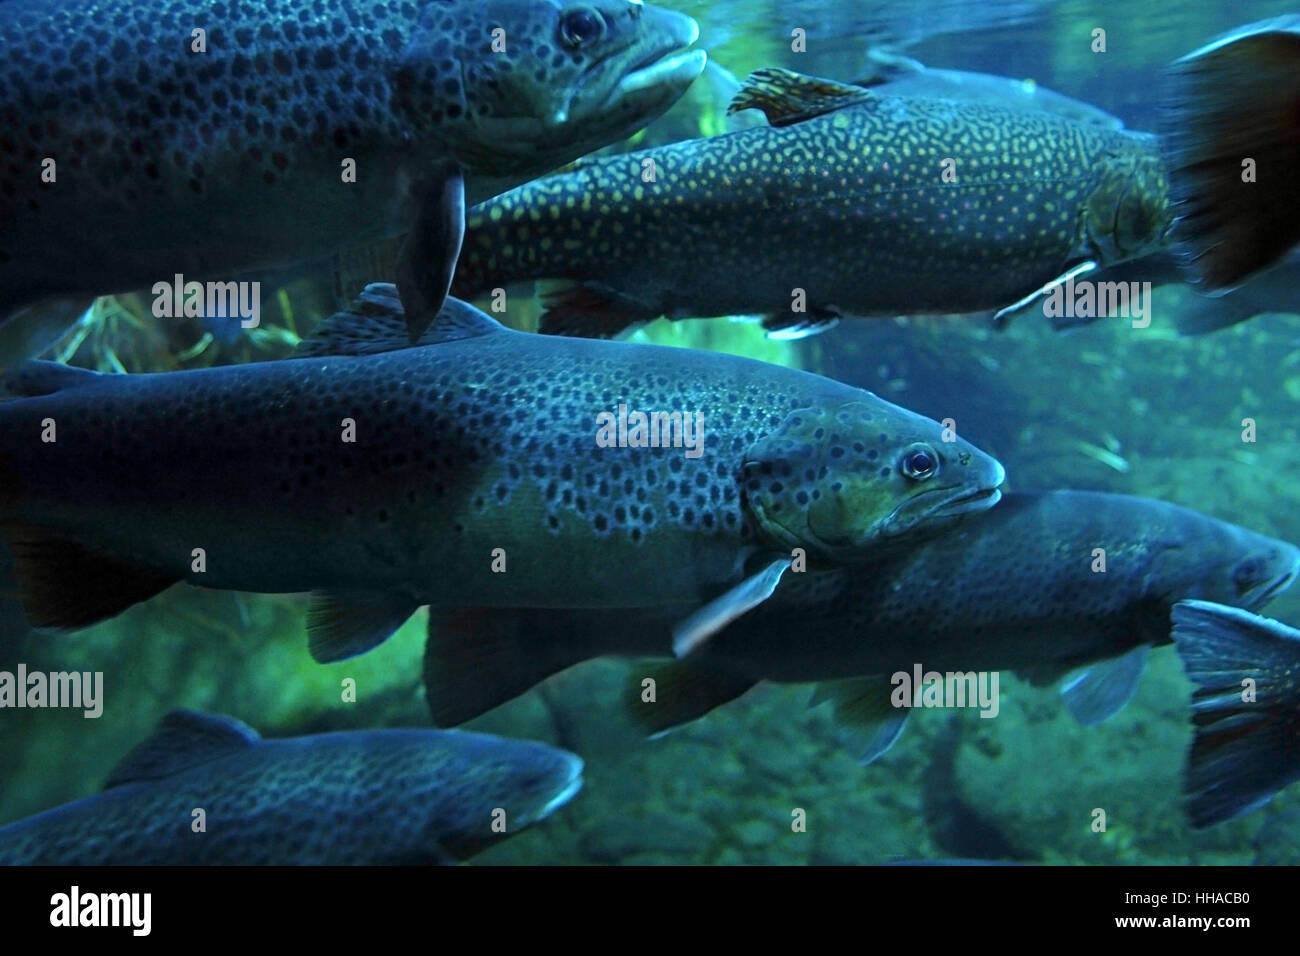 bluish underwater scenery showing a swarm of Trouts Stock Photo